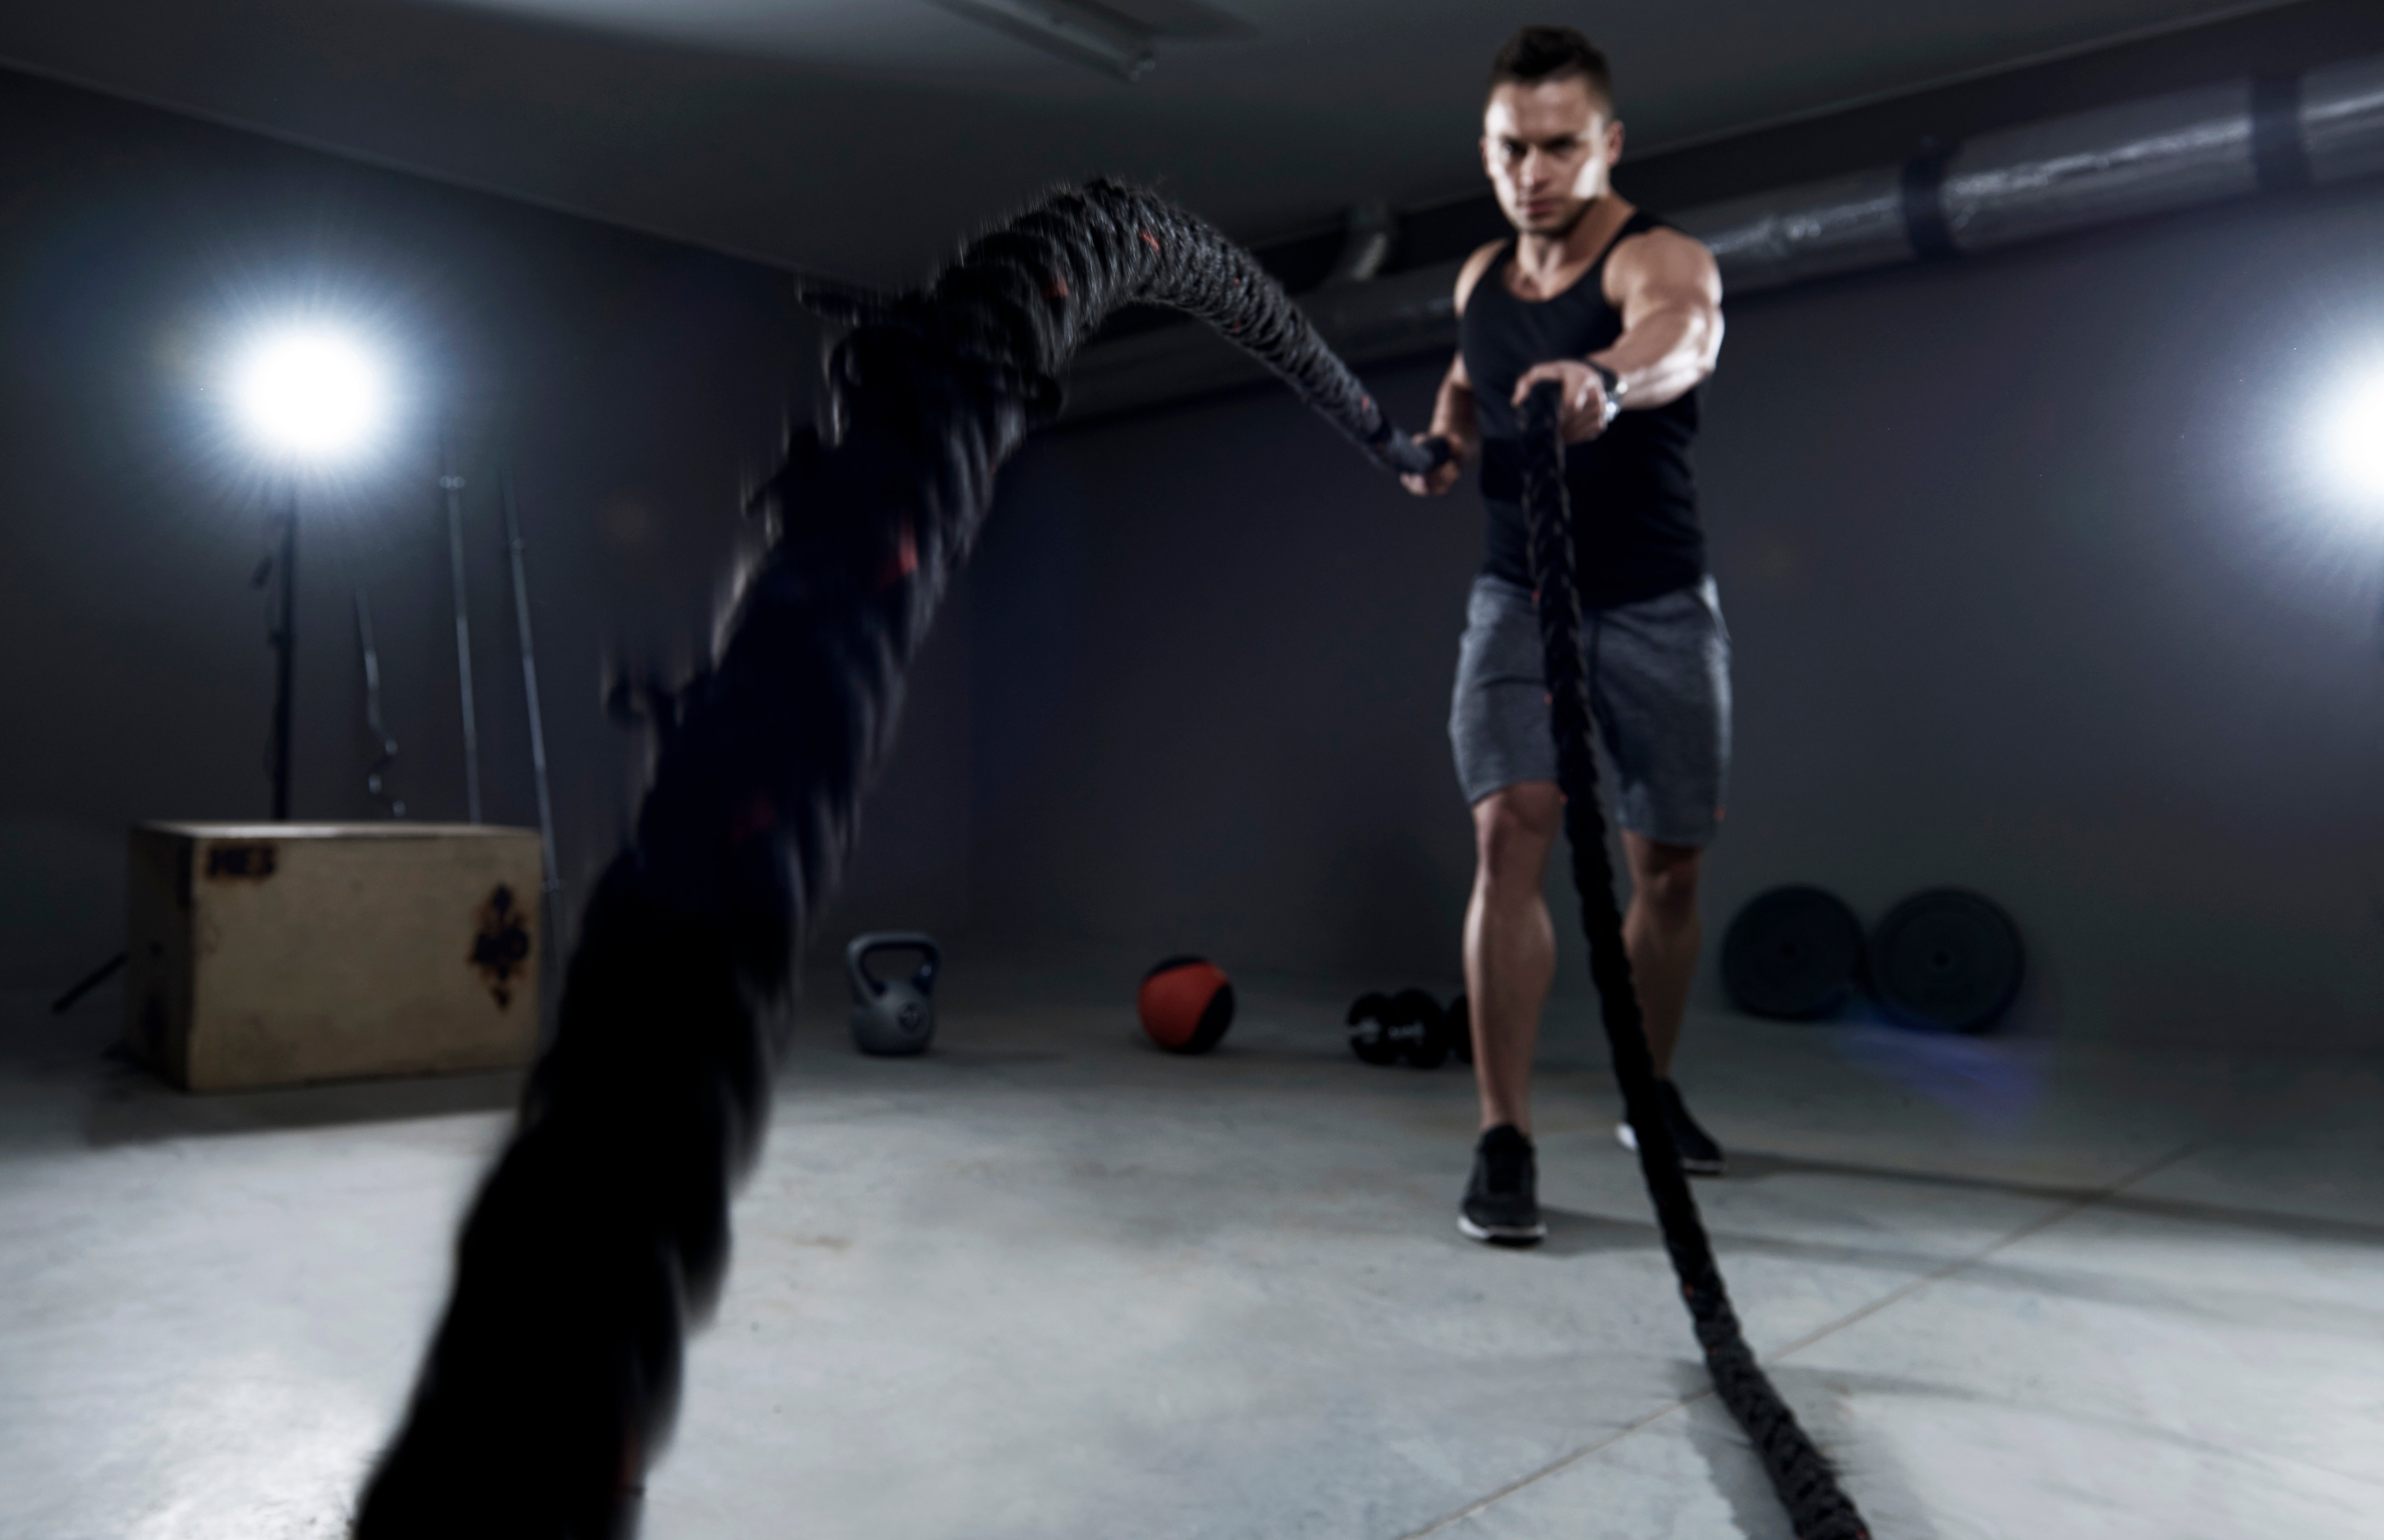 battle-ropes-exercise-in-the-garage-SBI-328453070